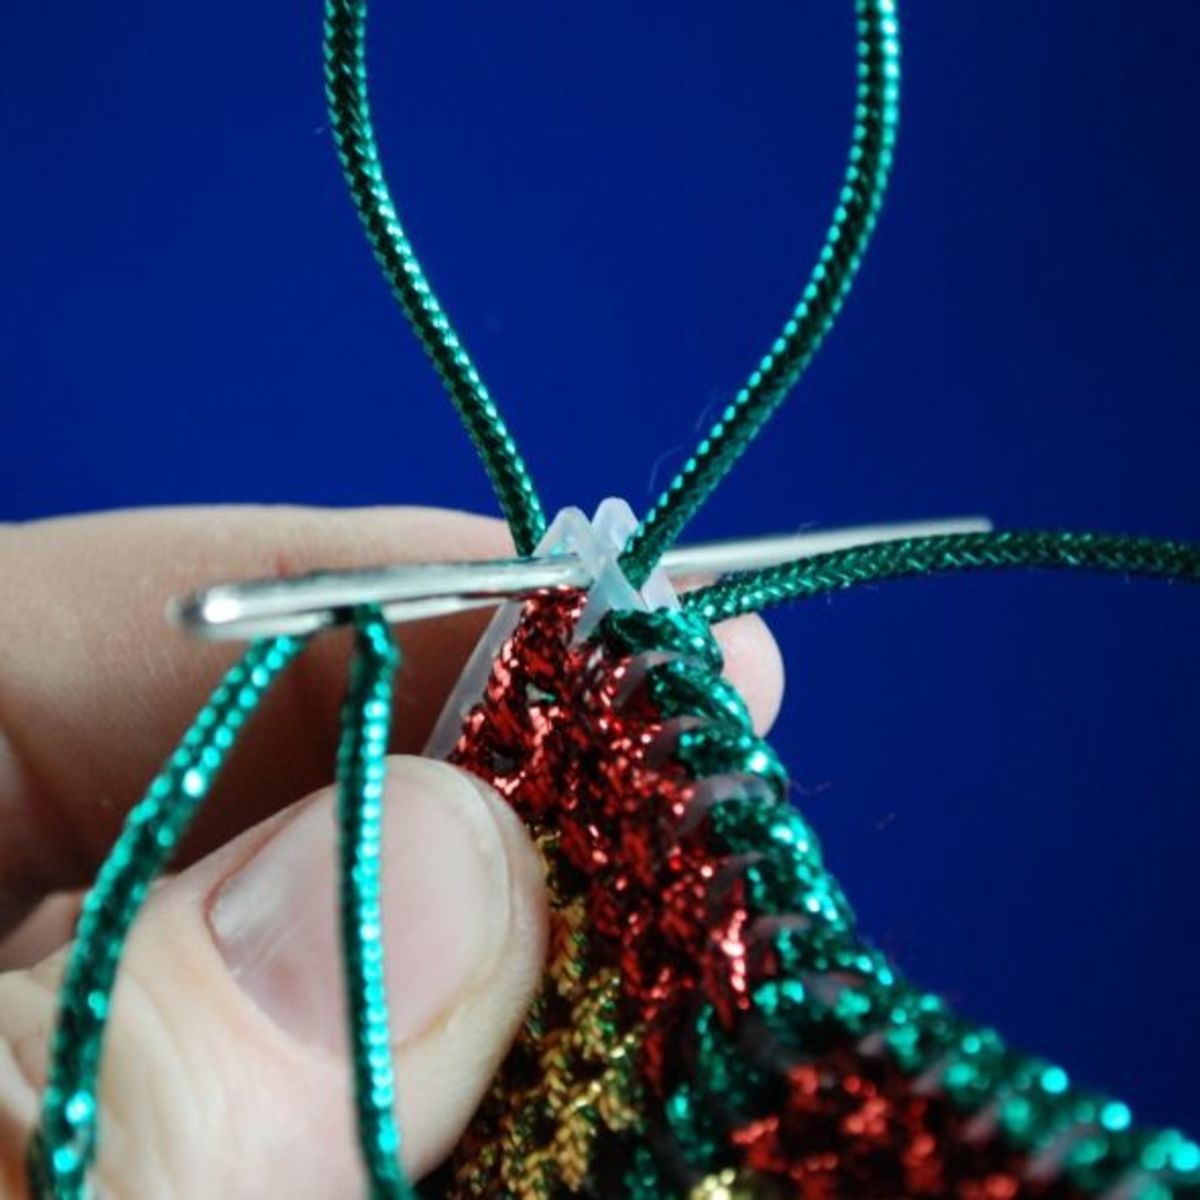 stitching in the loop